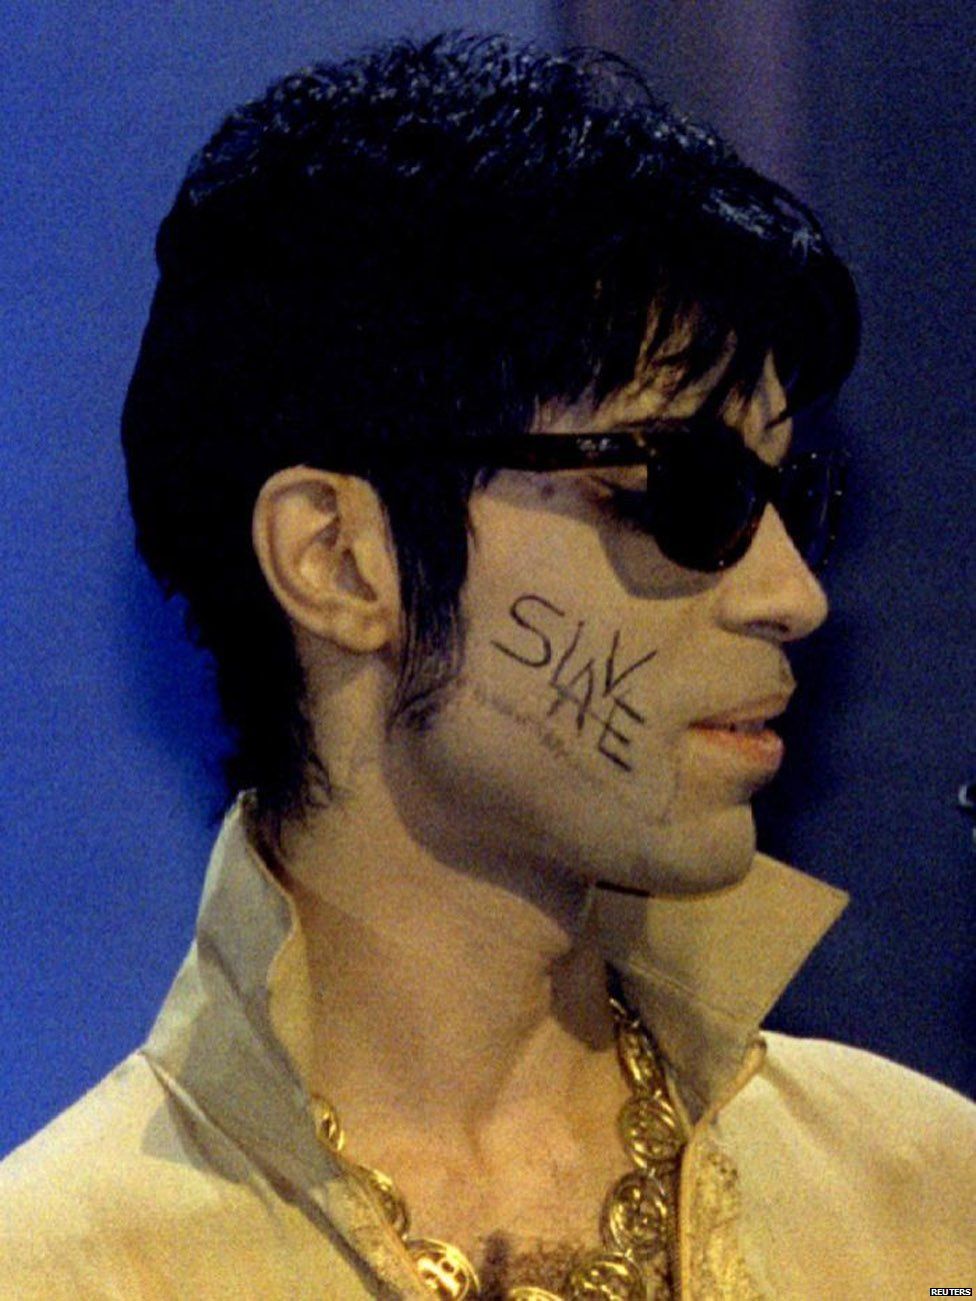 Prince with "slave" on his face